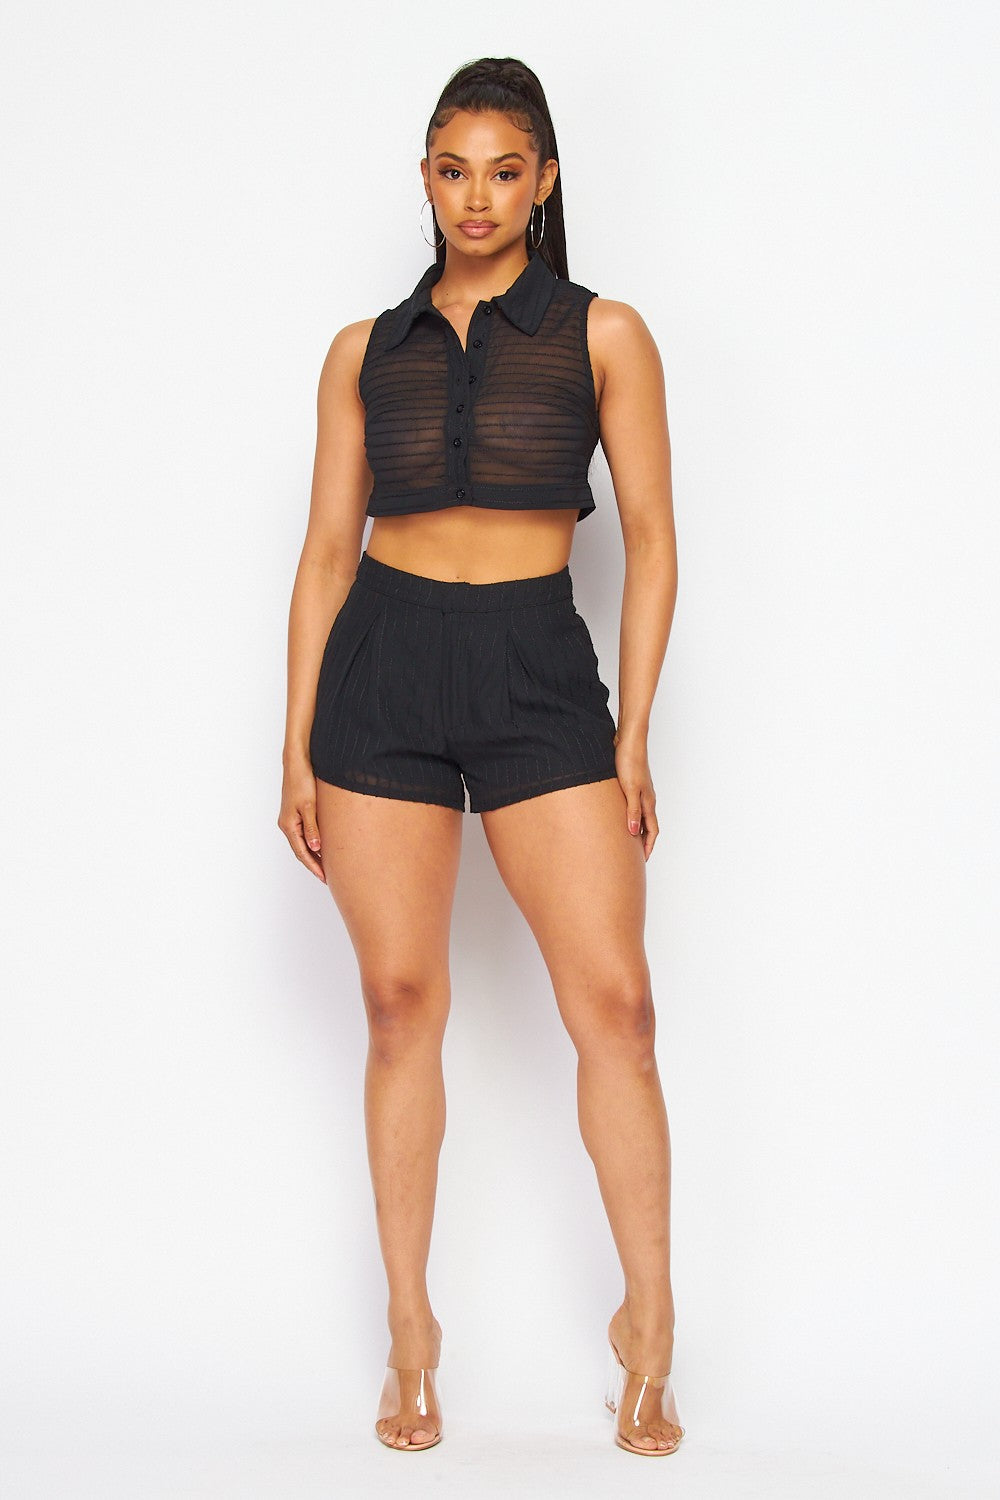 Do It Right Sheer Crop Top and Shorts Set